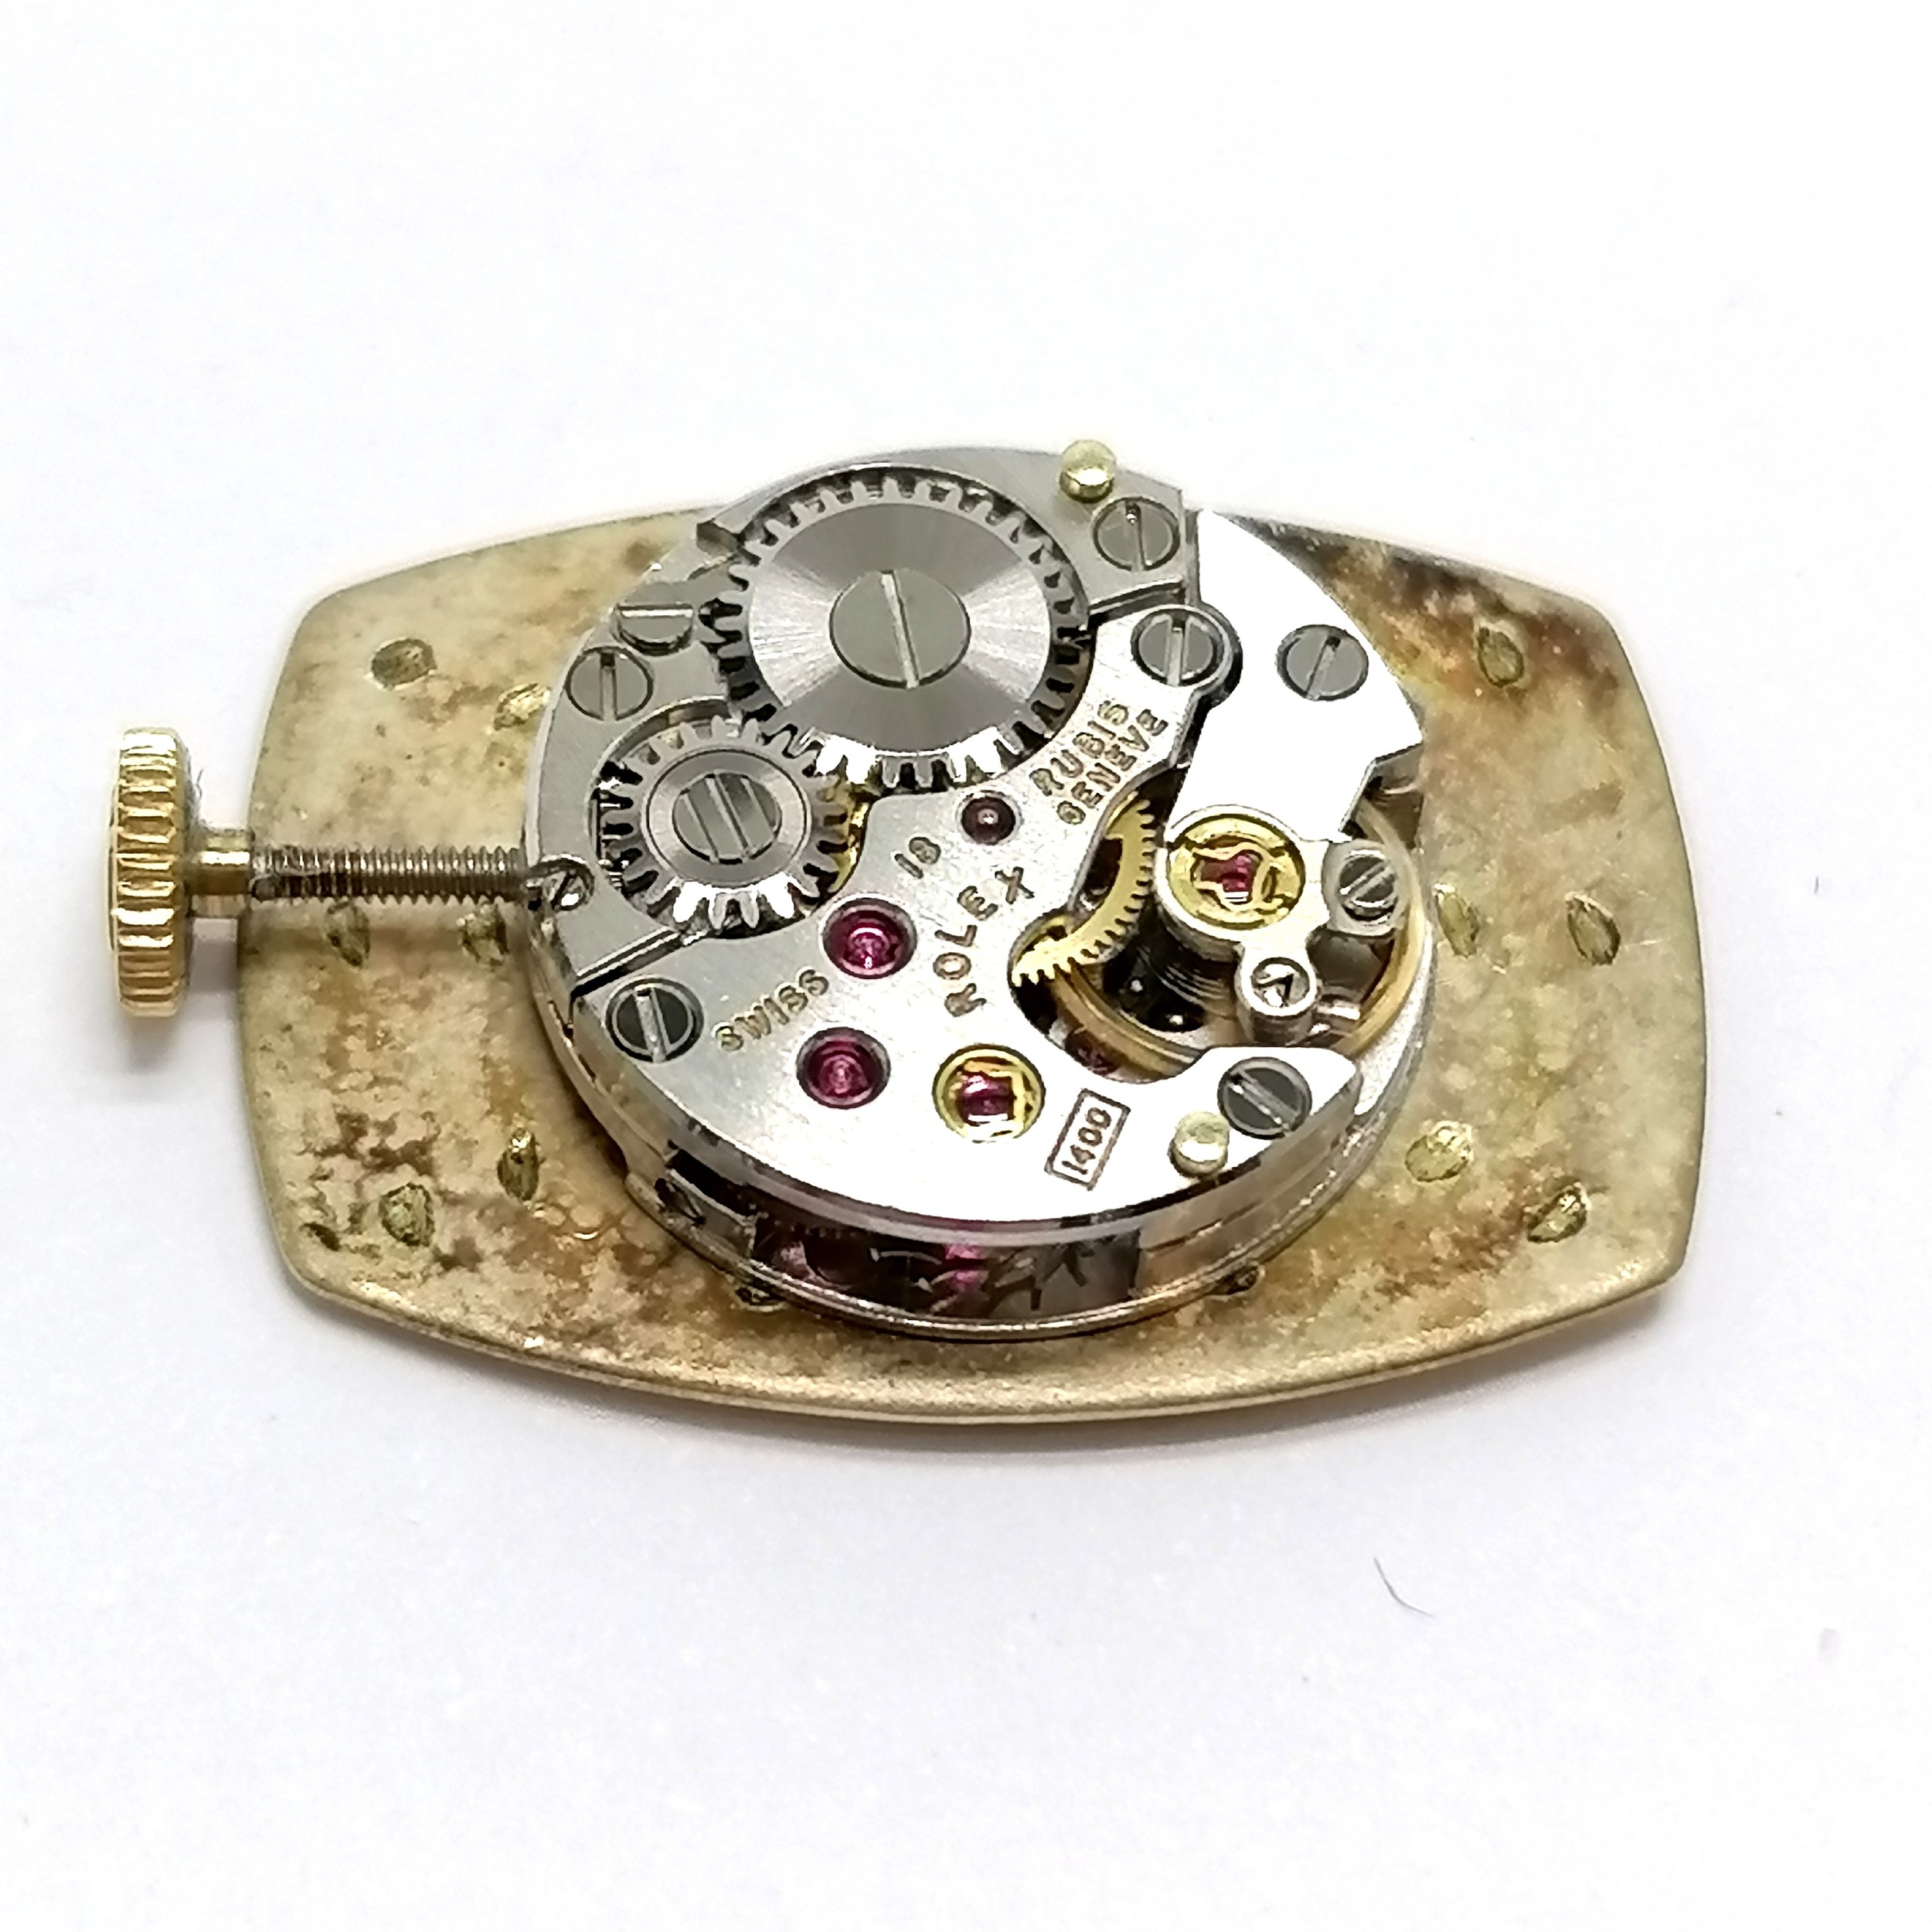 Rolex precision manual wind wristwatch movement #1400 (dial 21mm across) & running - for spares / - Image 2 of 2